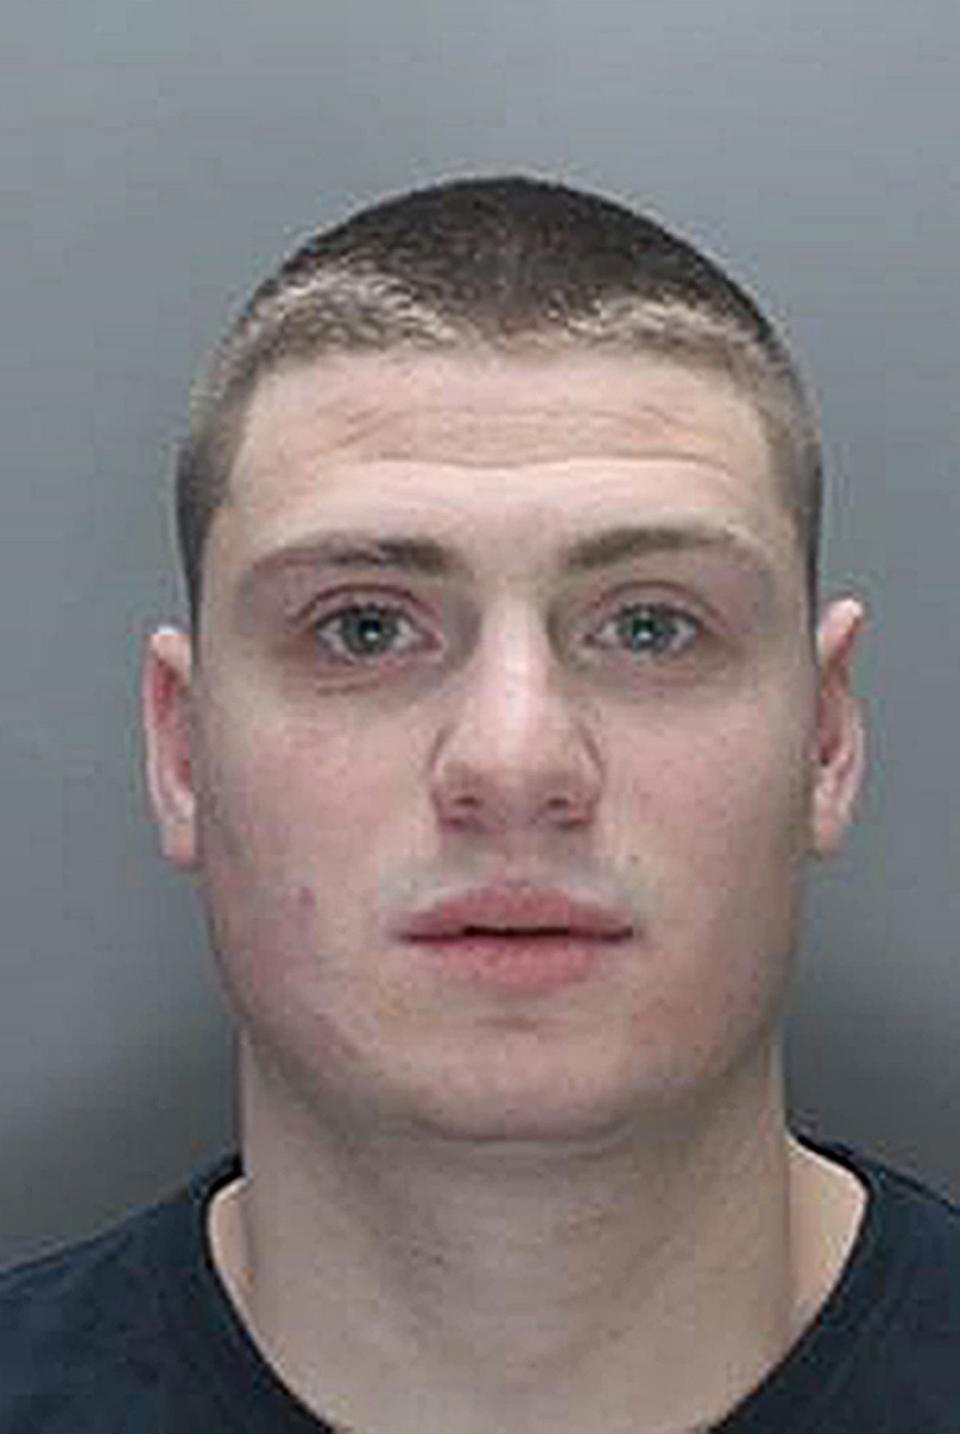 Walmsley was sentenced to life in prison in 2015 (Picture: PA)